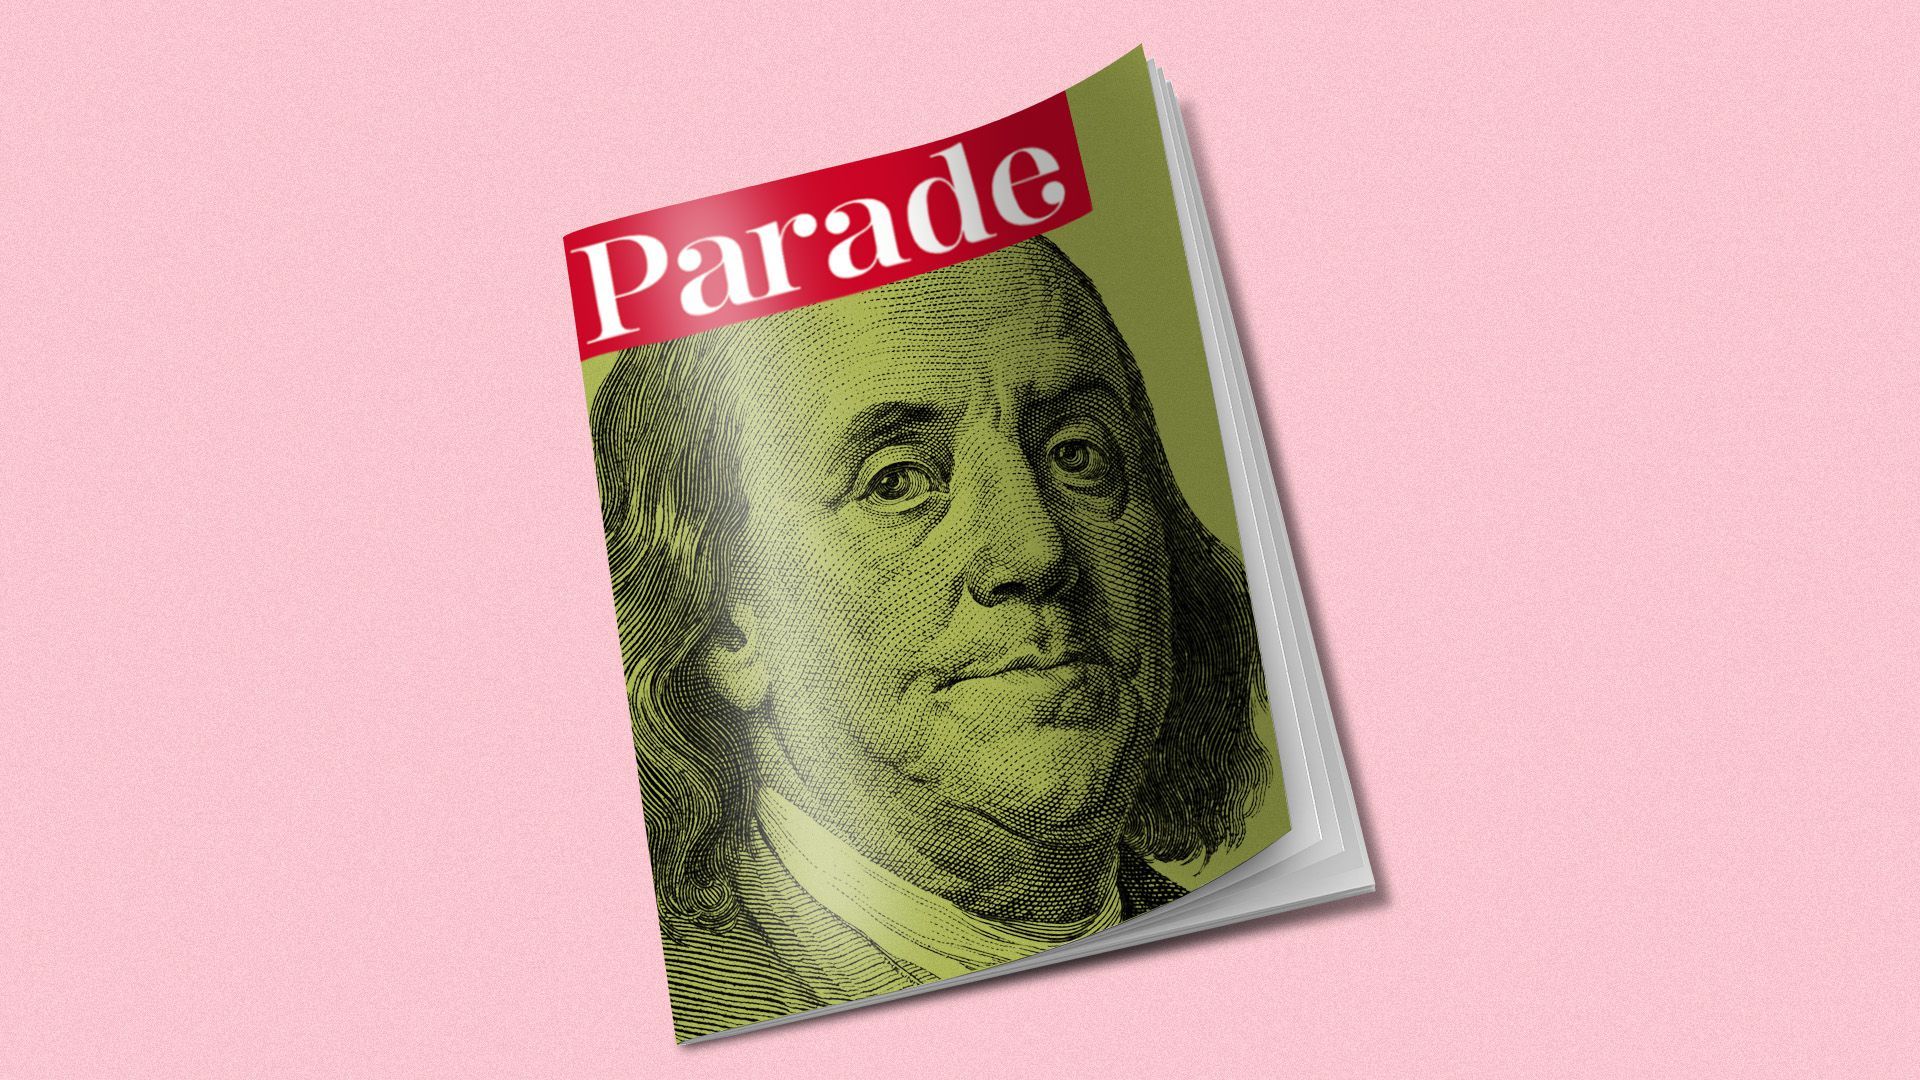 Illustration of a Parade Magazine cover featuring Benjamin Franklin